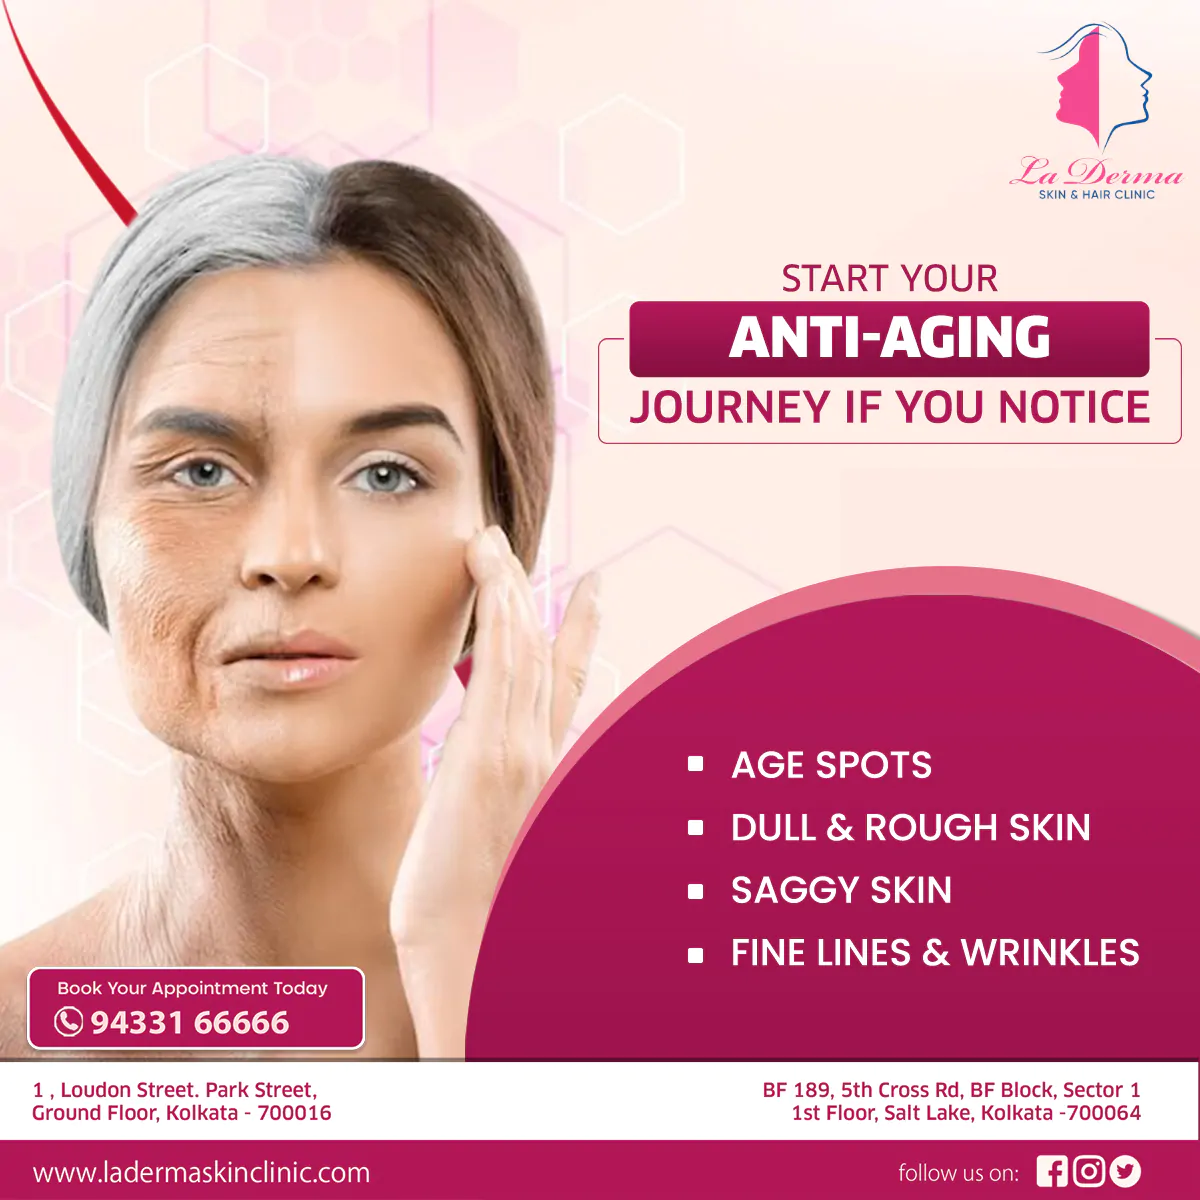 Start Your Anti-aging Journey If You Notice